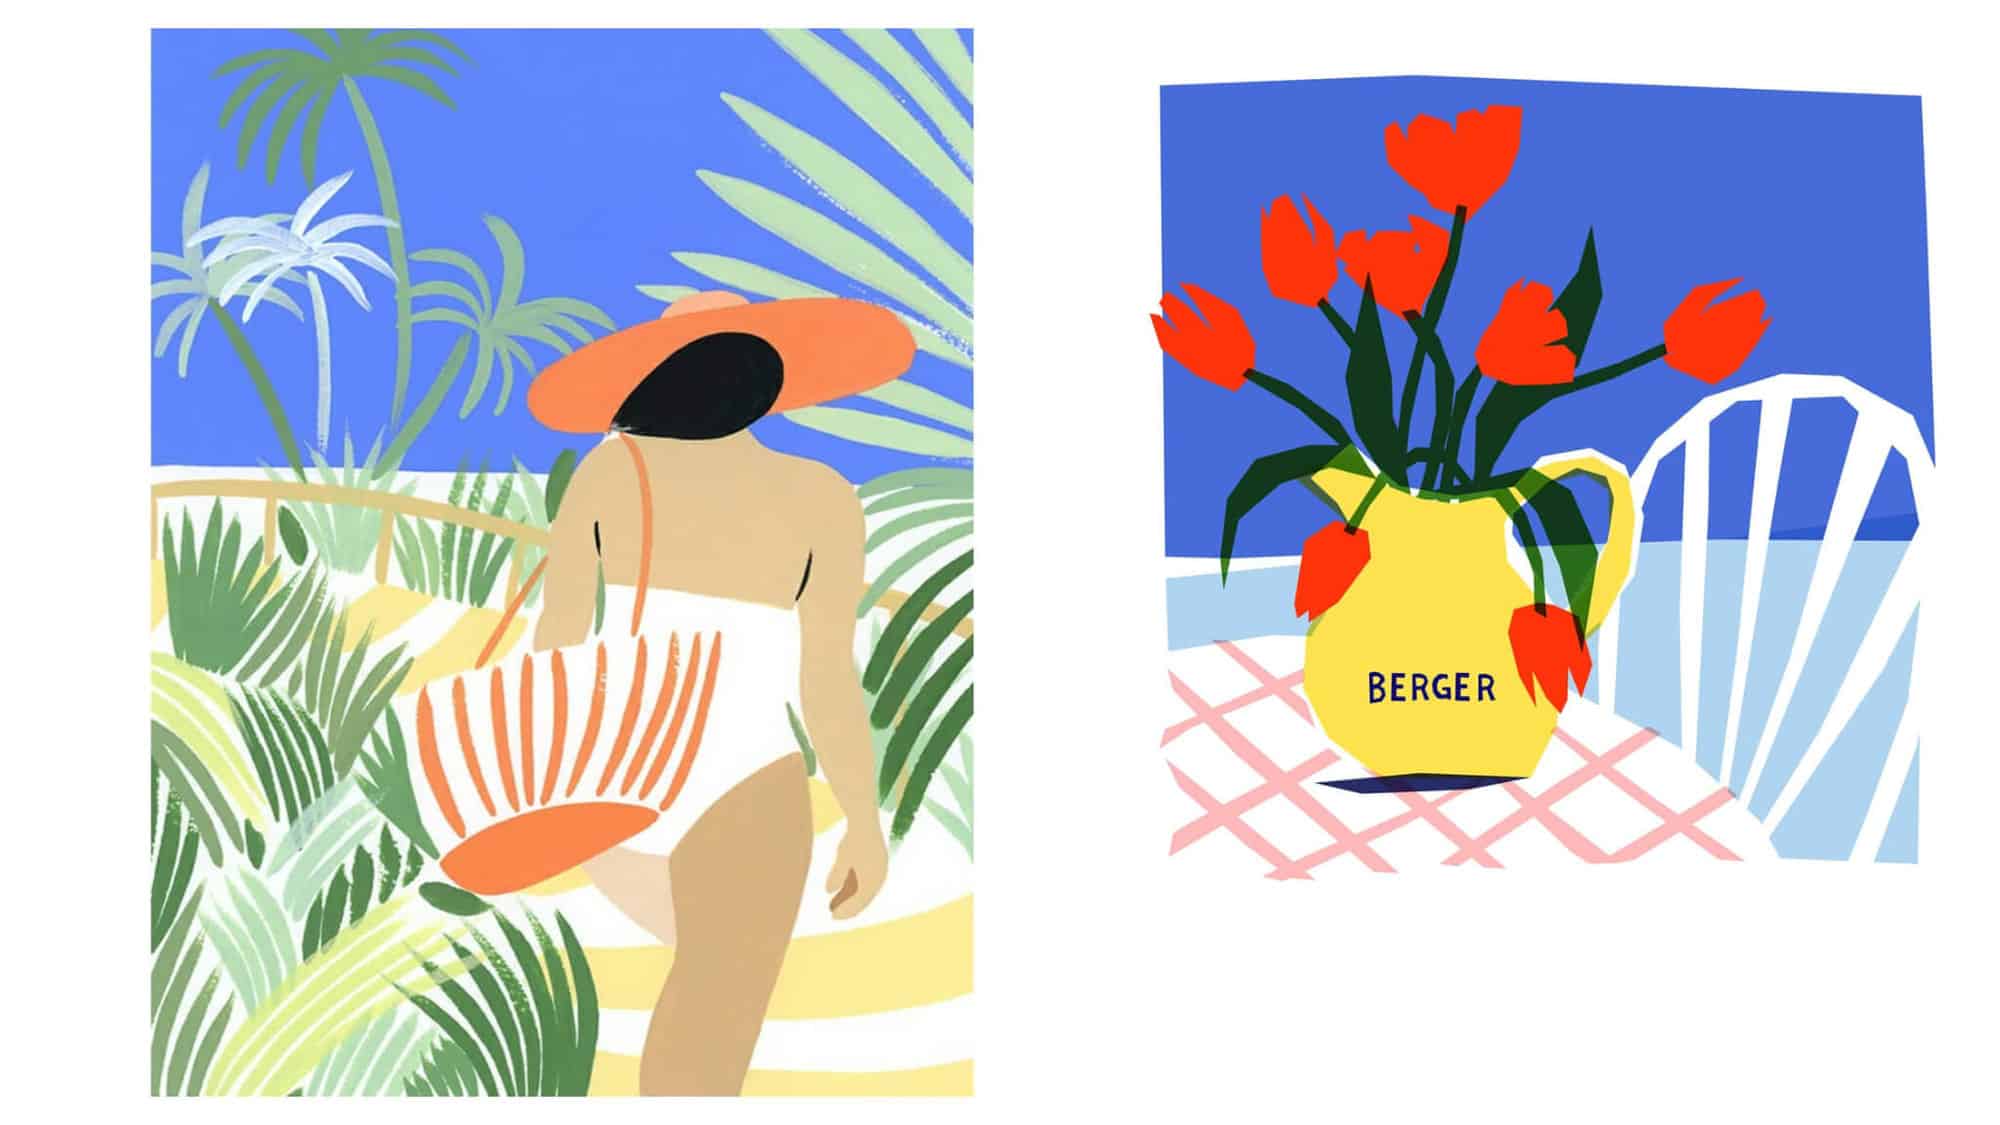 Left: a colour print by Mugluck of a woman in a swimsuit with a bag and hat walking through greenery to the beach. Right: a colour print by Marie Doazan of a vase of flowers on a table next to a chair. On the vase is the word 'Berger'.